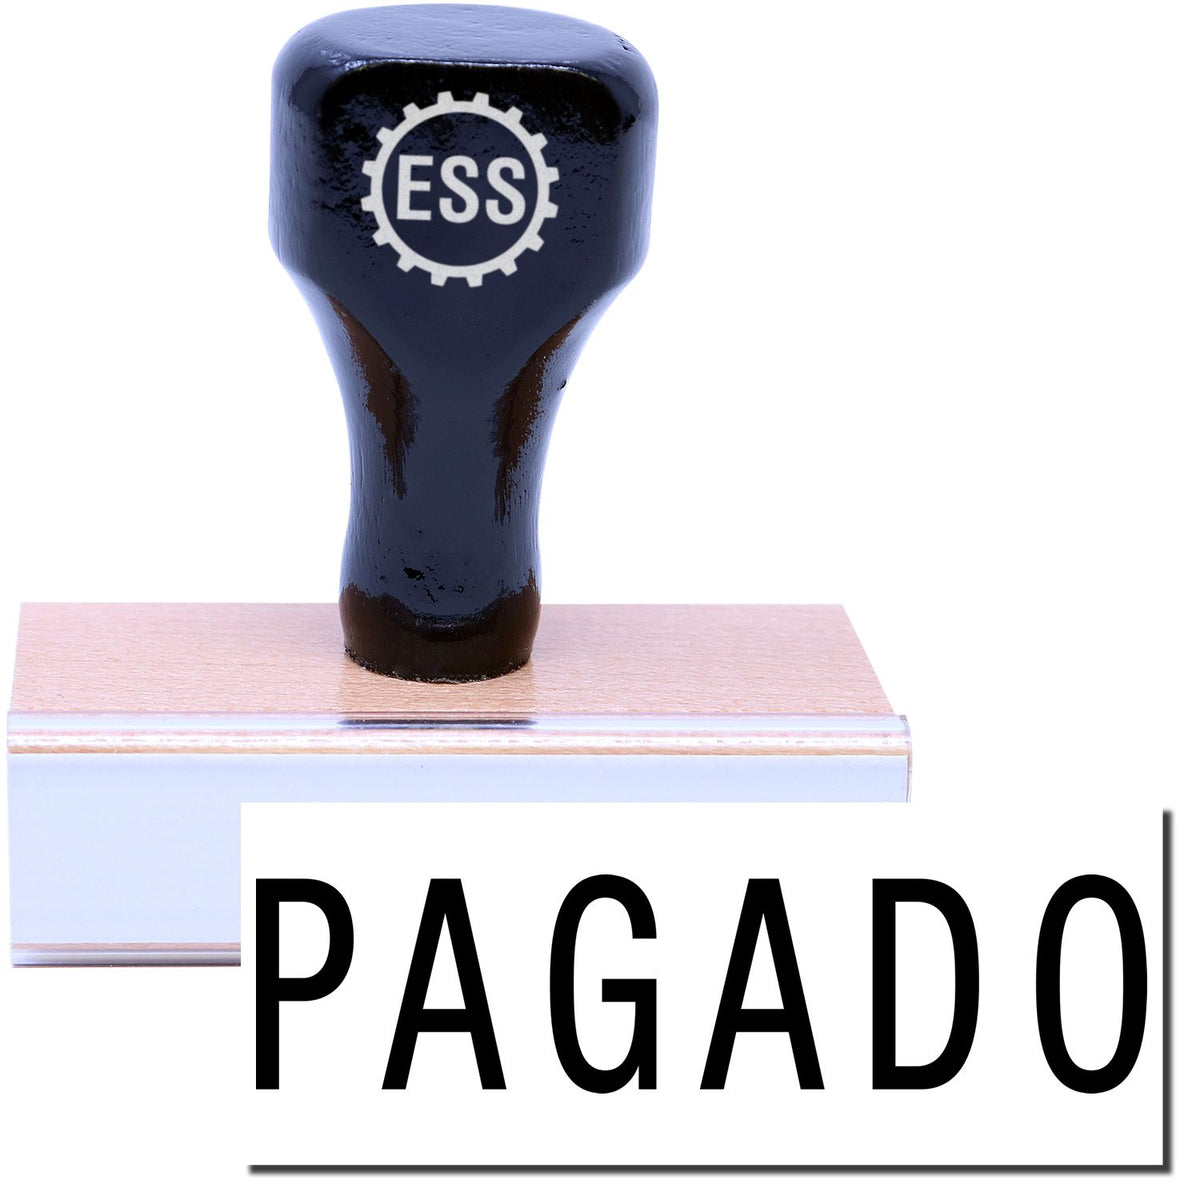 A stock office rubber stamp with a stamped image showing how the text &quot;PAGADO&quot; in a large font is displayed after stamping.